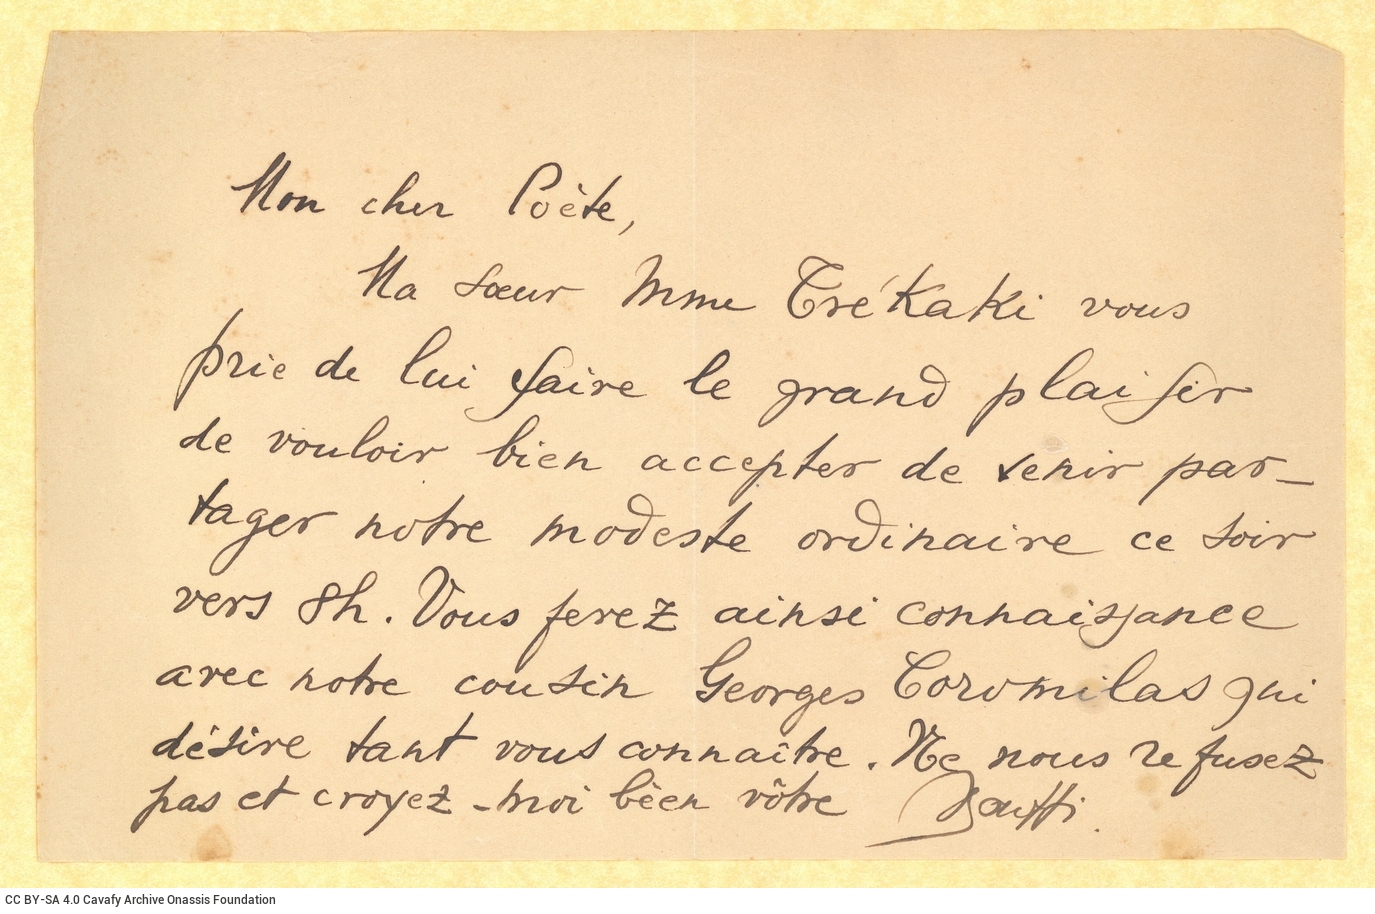 Handwritten note by Alec Skouffi to Cavafy. It is an invitation on behalf of his sister, Aikaterini Trechaki, in order for Ca